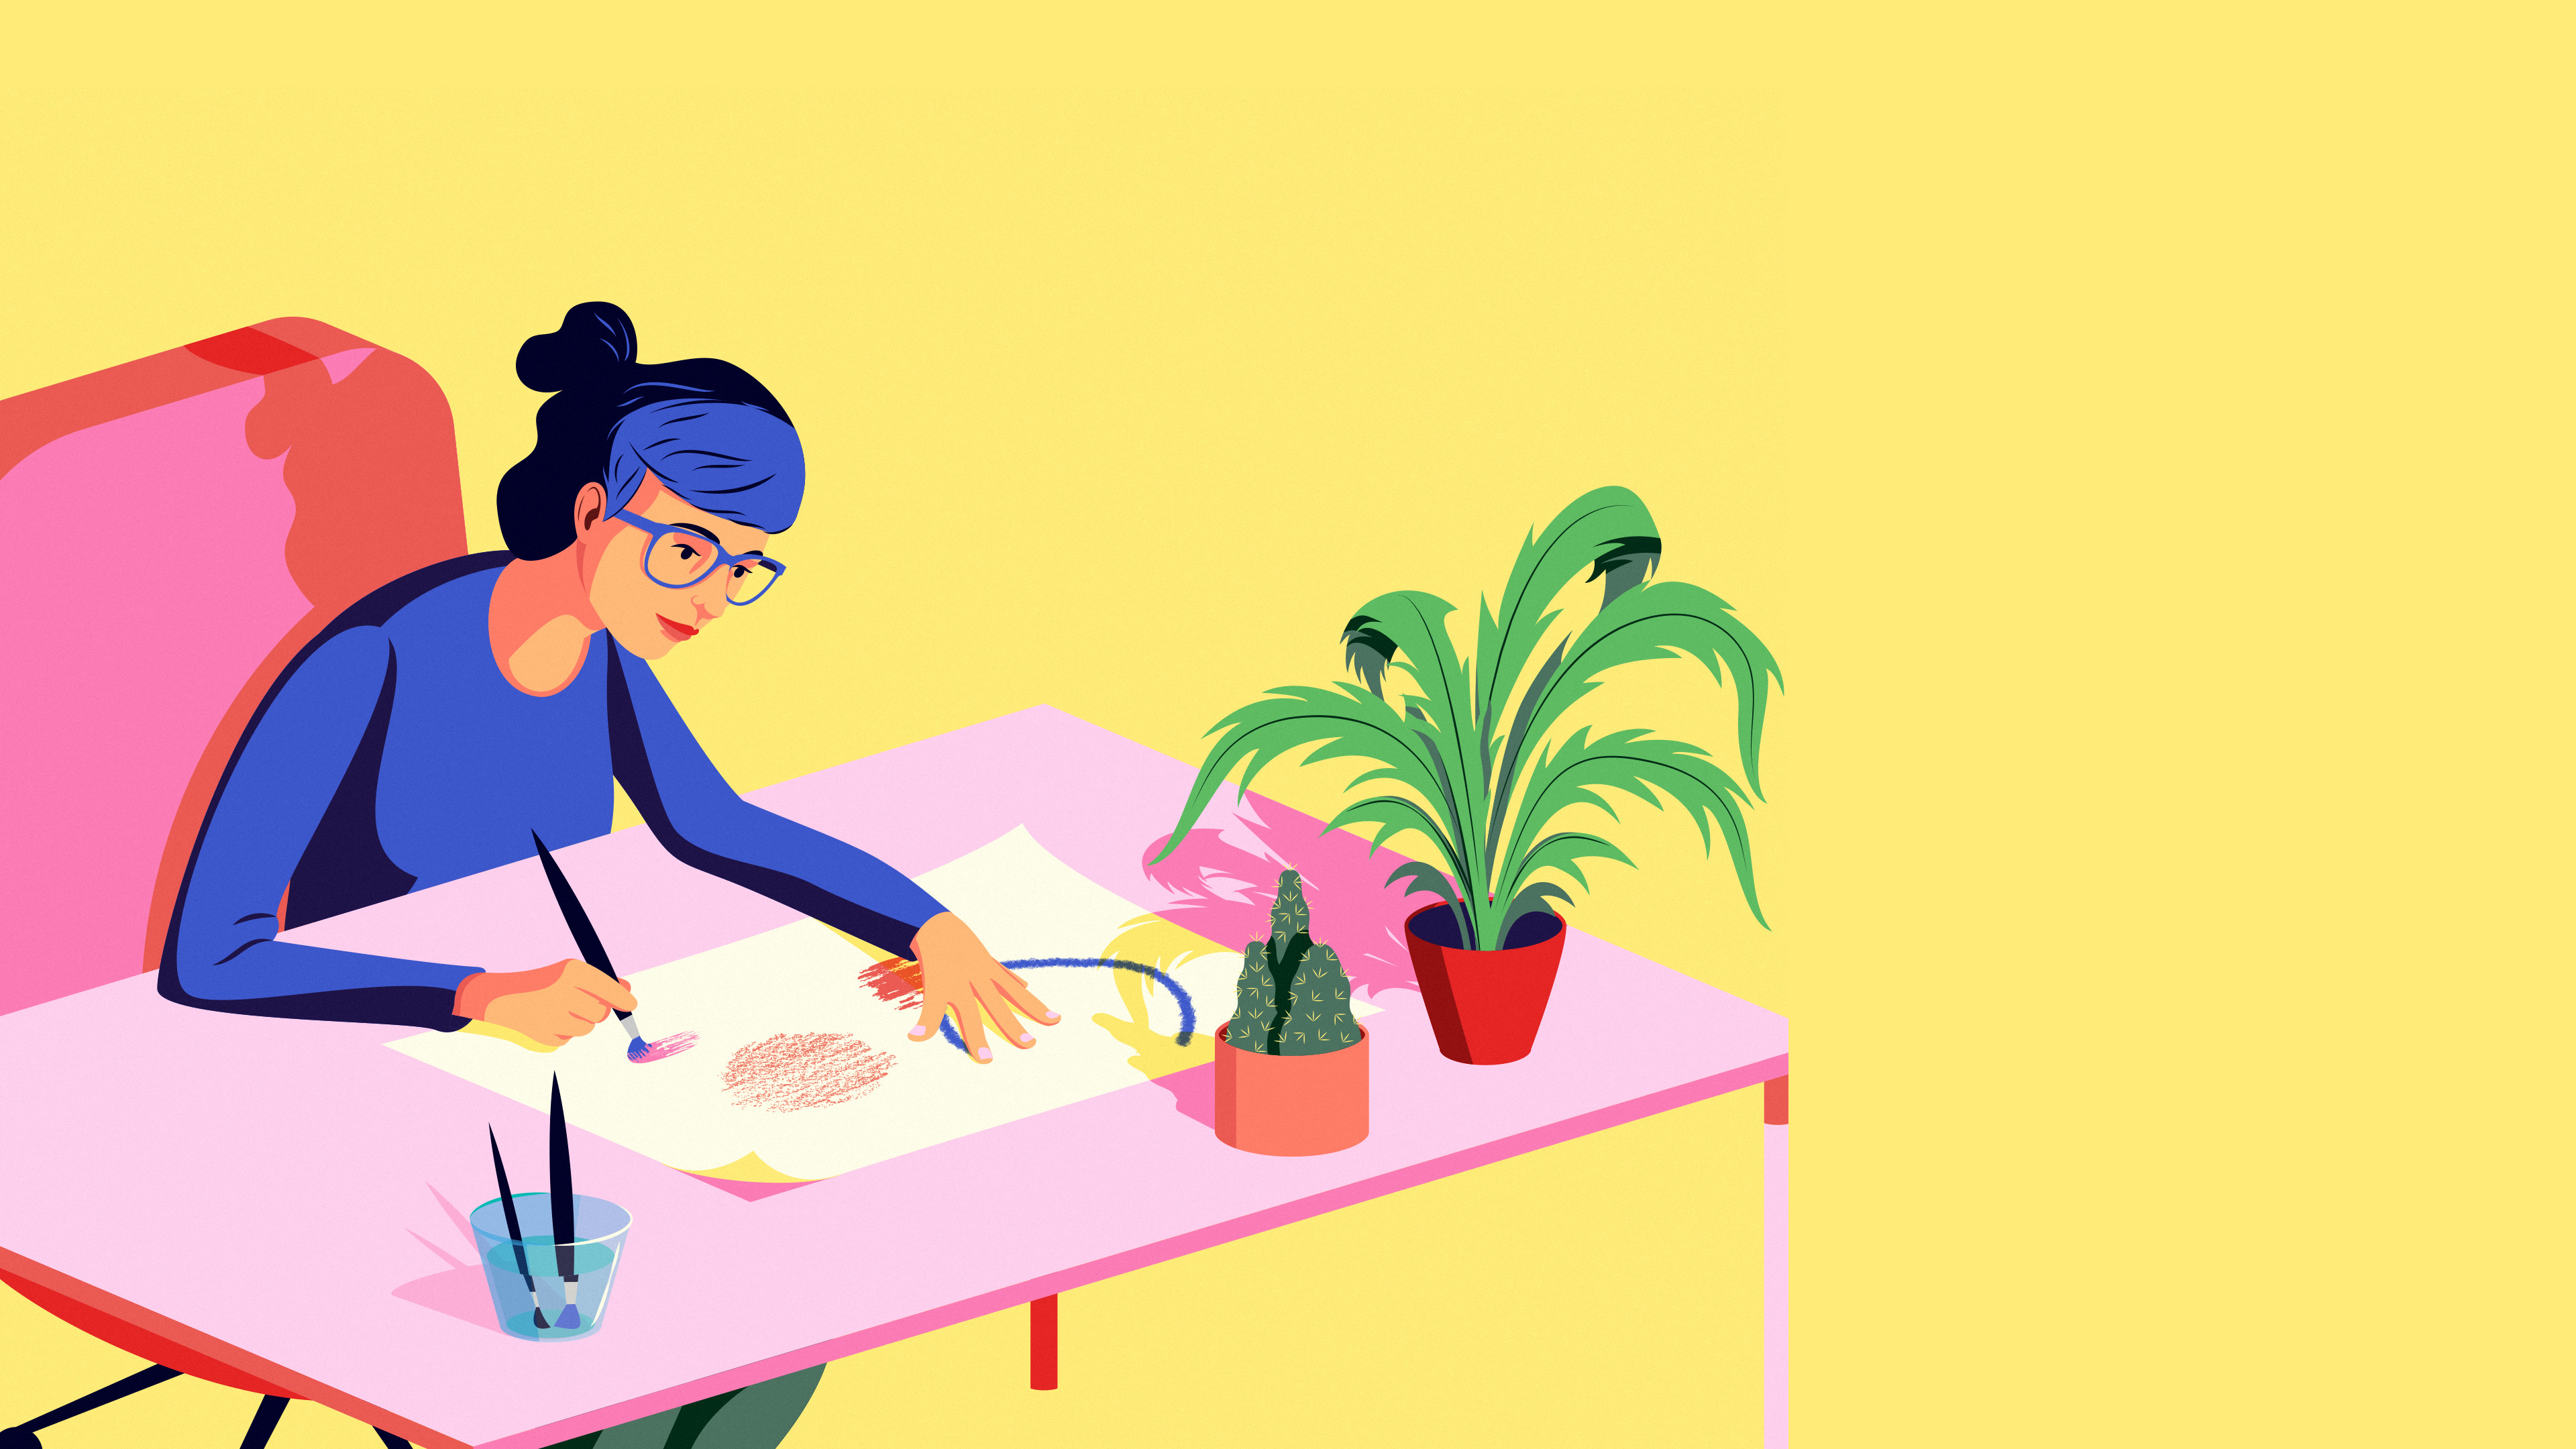 illustration, Yellow background, Sketches, Desk, Work, Cactus, Watercolor, Glasses, Blue shirt Wallpaper